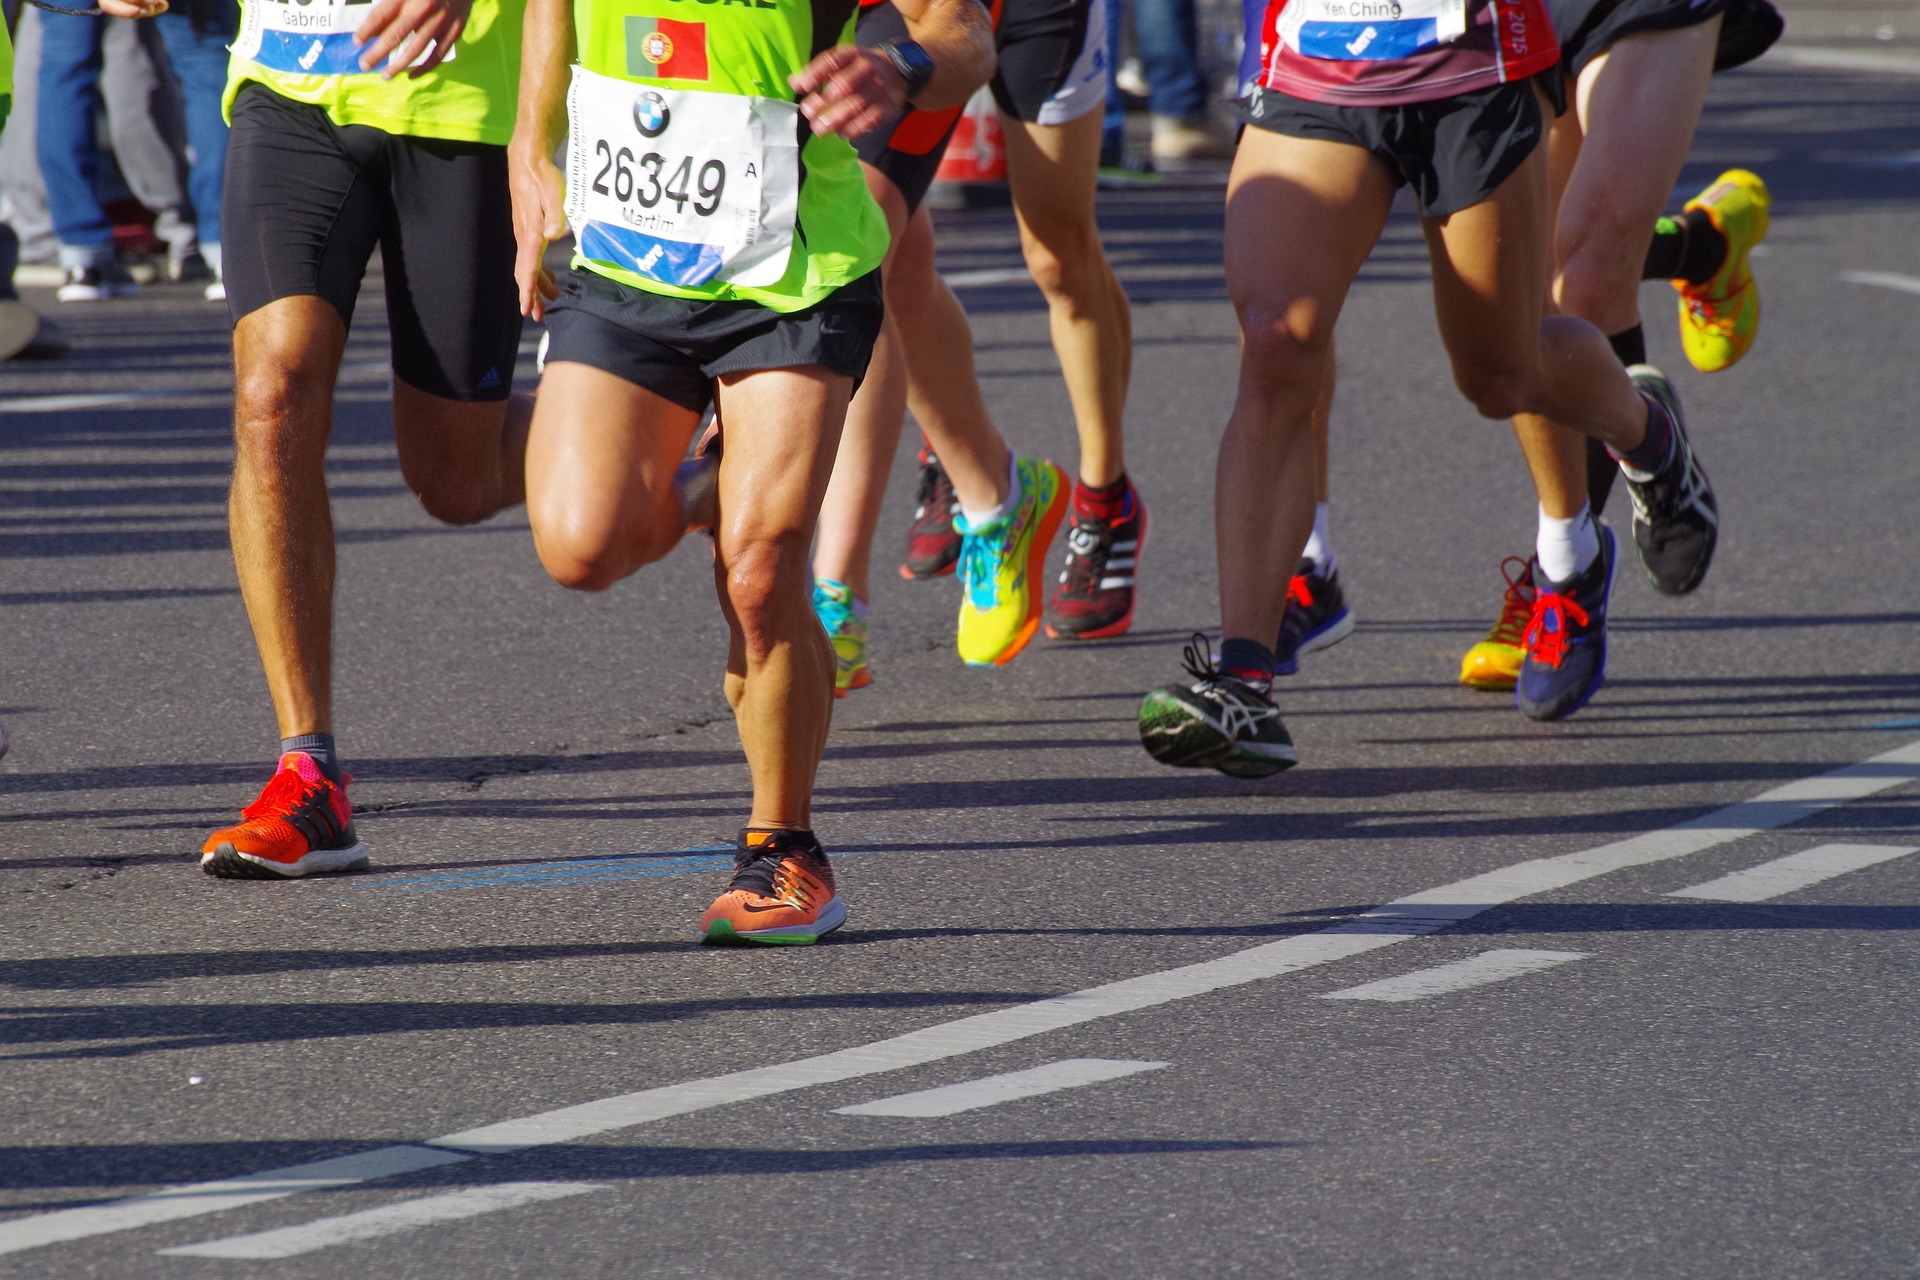 Wrocław Marathon: A Pulsating Athletic Spectacle in the Heart of Poland